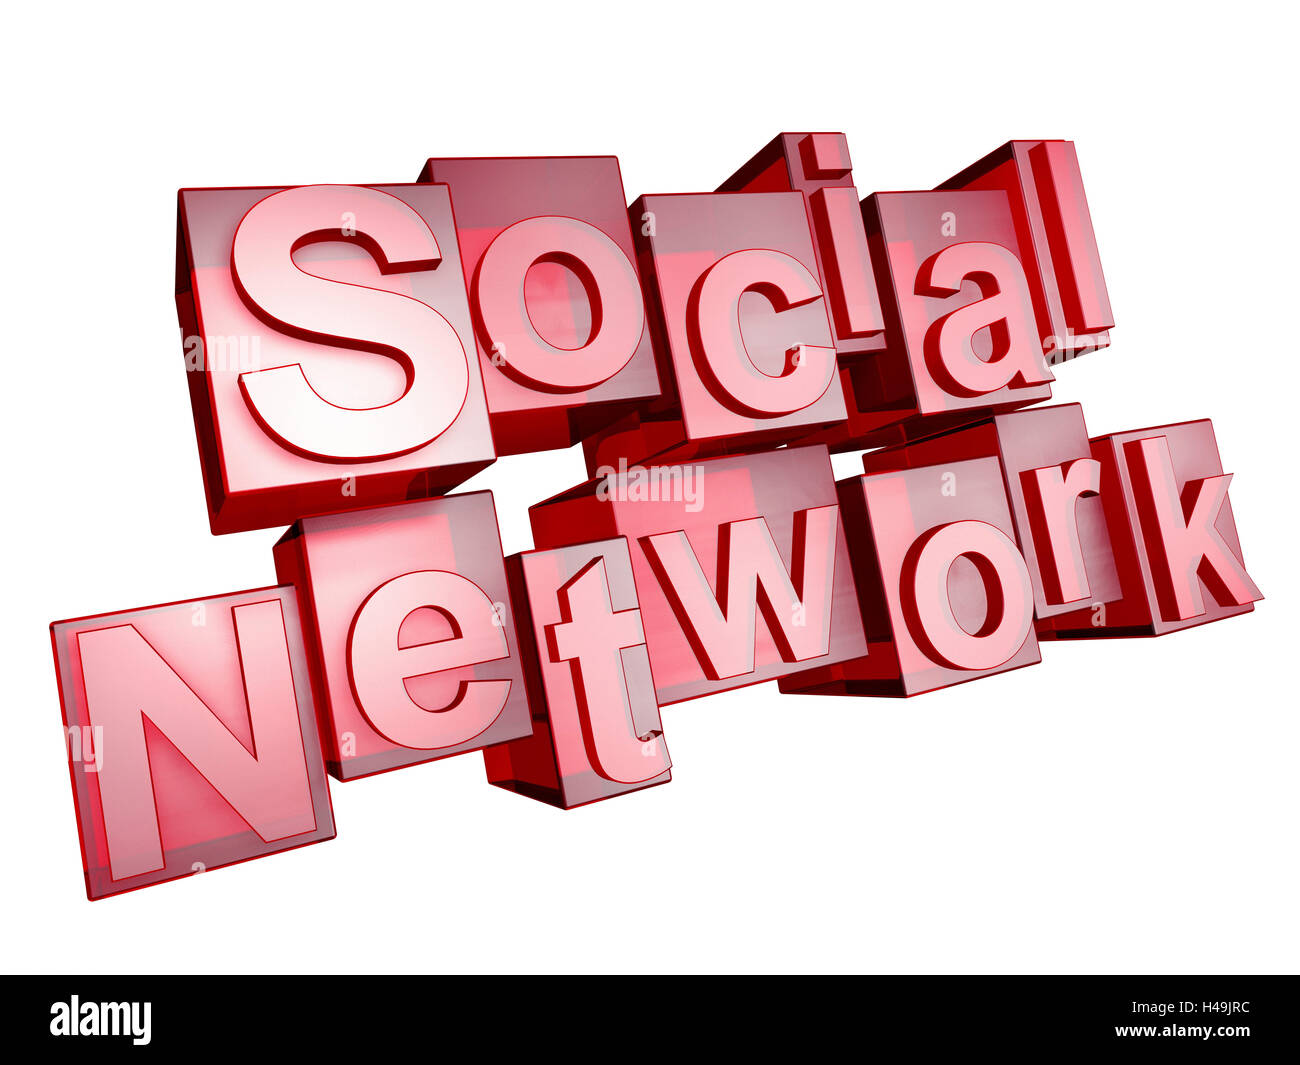 Social network, red, white background, Stock Photo